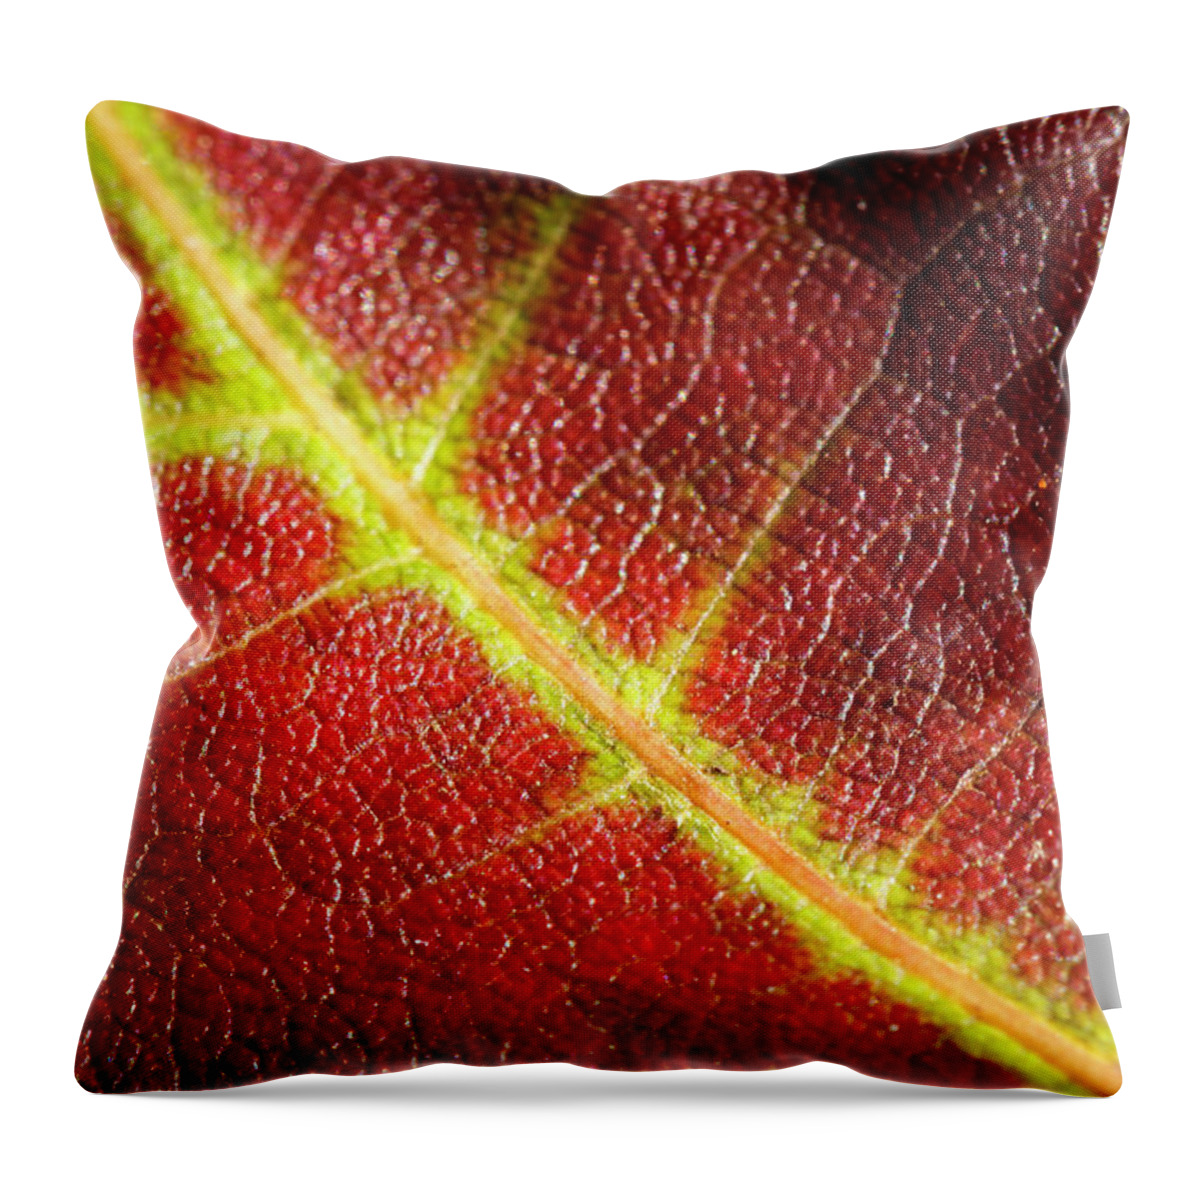 Fall Throw Pillow featuring the photograph Autumn Fall Leaf Close Up by Rick Deacon